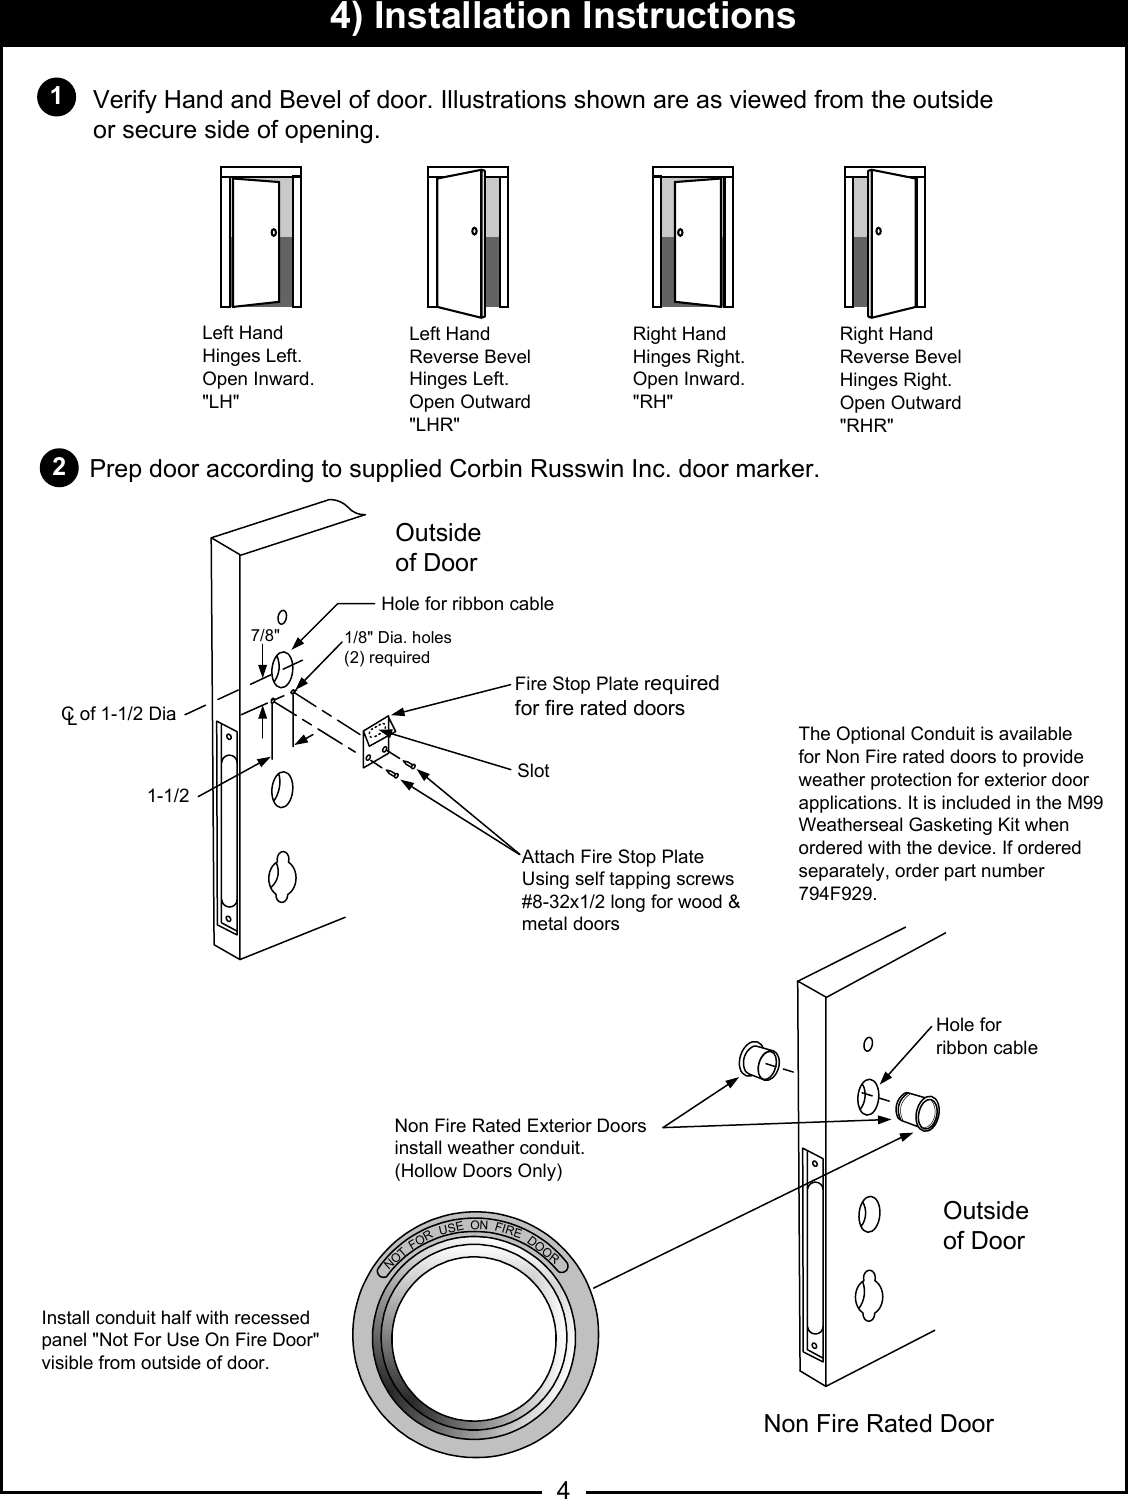 Verify Hand and Bevel of door. Illustrations shown are as viewed from the outside or secure side of opening.14) Installation Instructions324Prep door according to supplied Corbin Russwin Inc. door marker.FORUSEON FIREDOORNOTLeft HandHinges Left.Open Inward.&quot;LH&quot;Left HandReverse BevelHinges Left.Open Outward&quot;LHR&quot;Right HandHinges Right.Open Inward.&quot;RH&quot;Right HandReverse BevelHinges Right.Open Outward&quot;RHR&quot;7/8&quot;1-1/21/8&quot; Dia. holes(2) requiredFire Stop Plate required for fire rated doorsSlotAttach Fire Stop PlateUsing self tapping screws#8-32x1/2 long for wood &amp;metal doors.C of 1-1/2 DiaLOutsideof DoorHole for ribbon cableNon Fire Rated Exterior Doorsinstall weather conduit.(Hollow Doors Only)Outsideof DoorNon Fire Rated DoorHole for ribbon cableInstall conduit half with recessedpanel &quot;Not For Use On Fire Door&quot;visible from outside of door.The Optional Conduit is availablefor Non Fire rated doors to provideweather protection for exterior doorapplications. It is included in the M99Weatherseal Gasketing Kit whenordered with the device. If orderedseparately, order part number794F929.